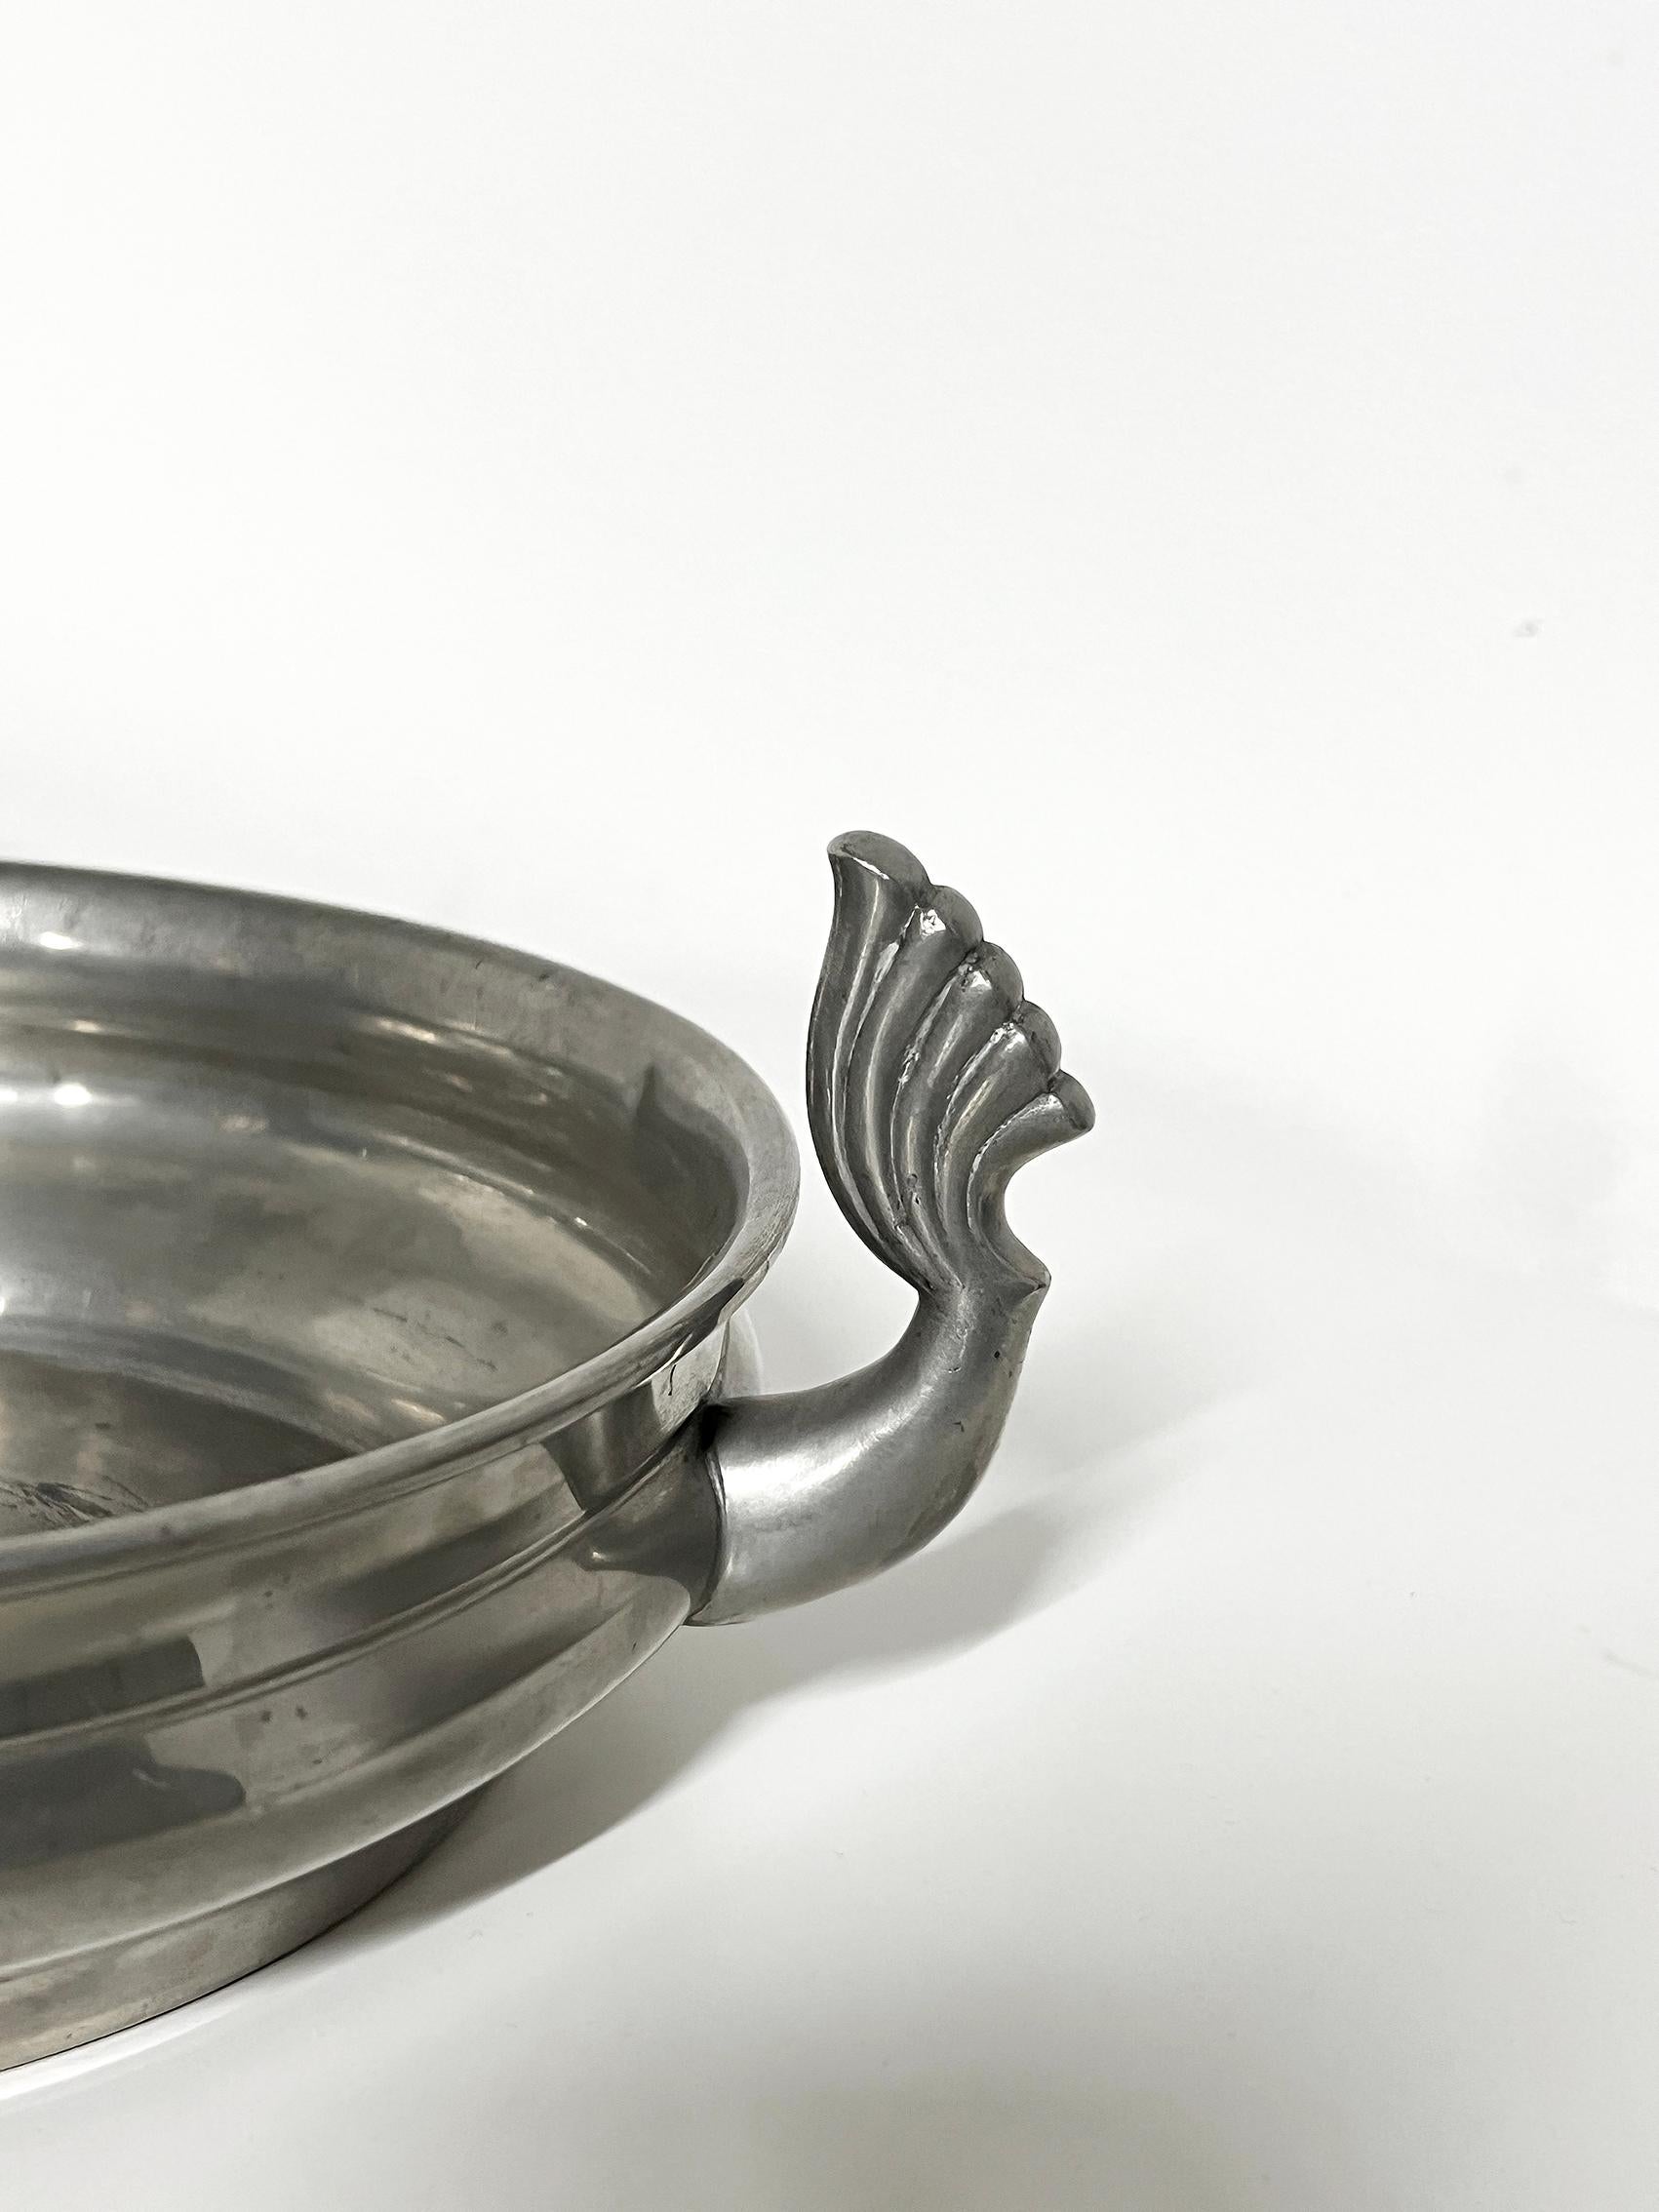 Mid-20th Century Swedish Modern Bowl in Pewter by CG Hallberg, 1930 For Sale